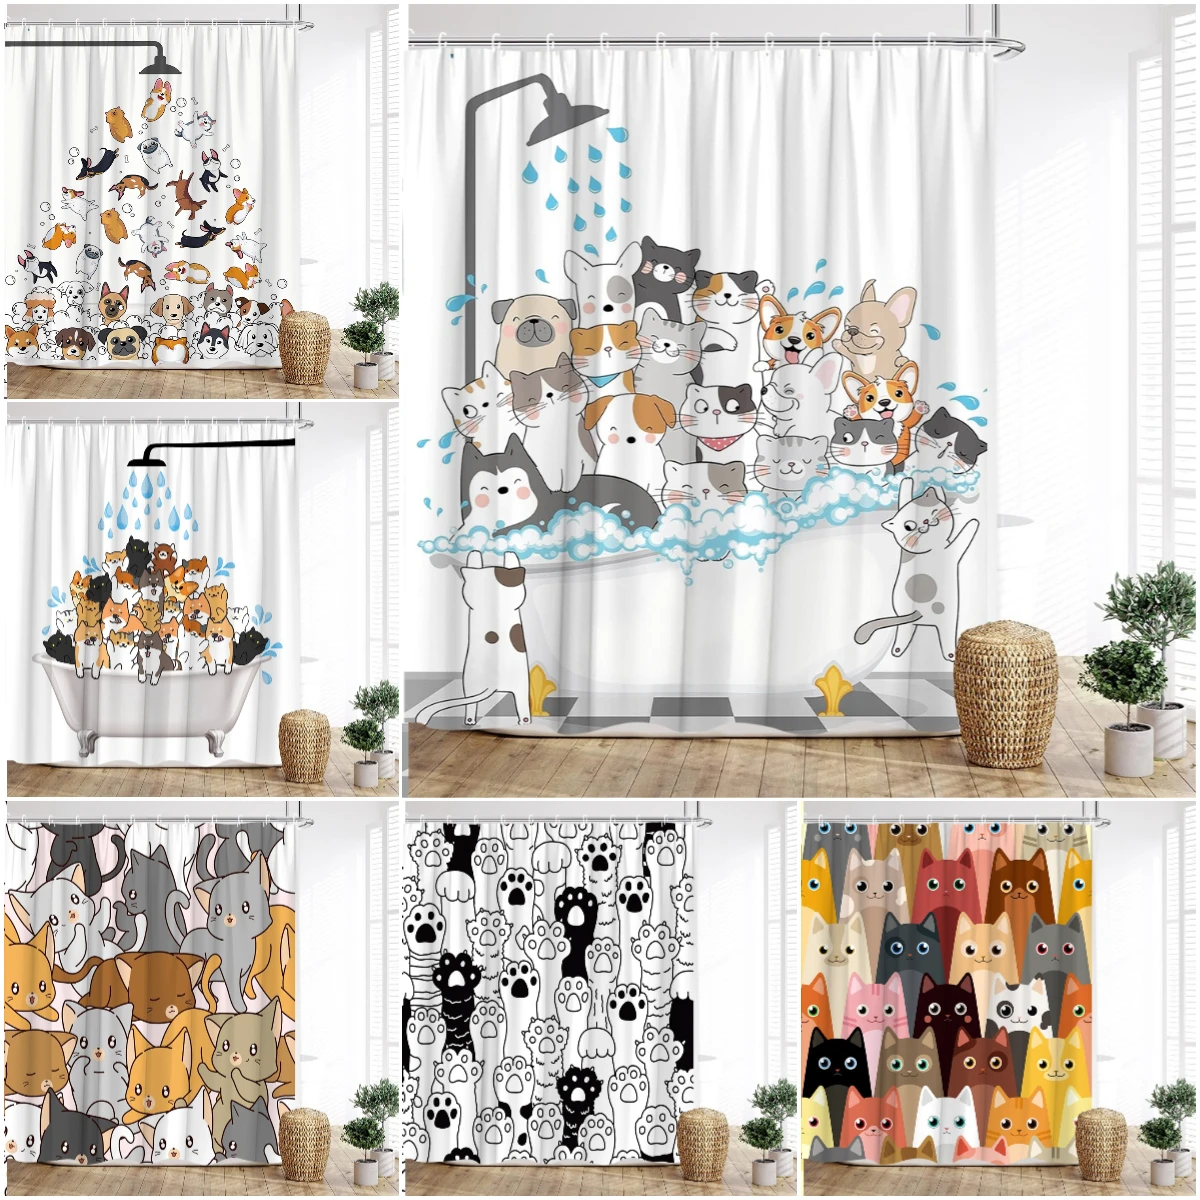 Cartoon Animal Shower Curtain with Funny Cat and Dog Paws Cute Kids Shower Print Family Bathroom Decoration with Hooks